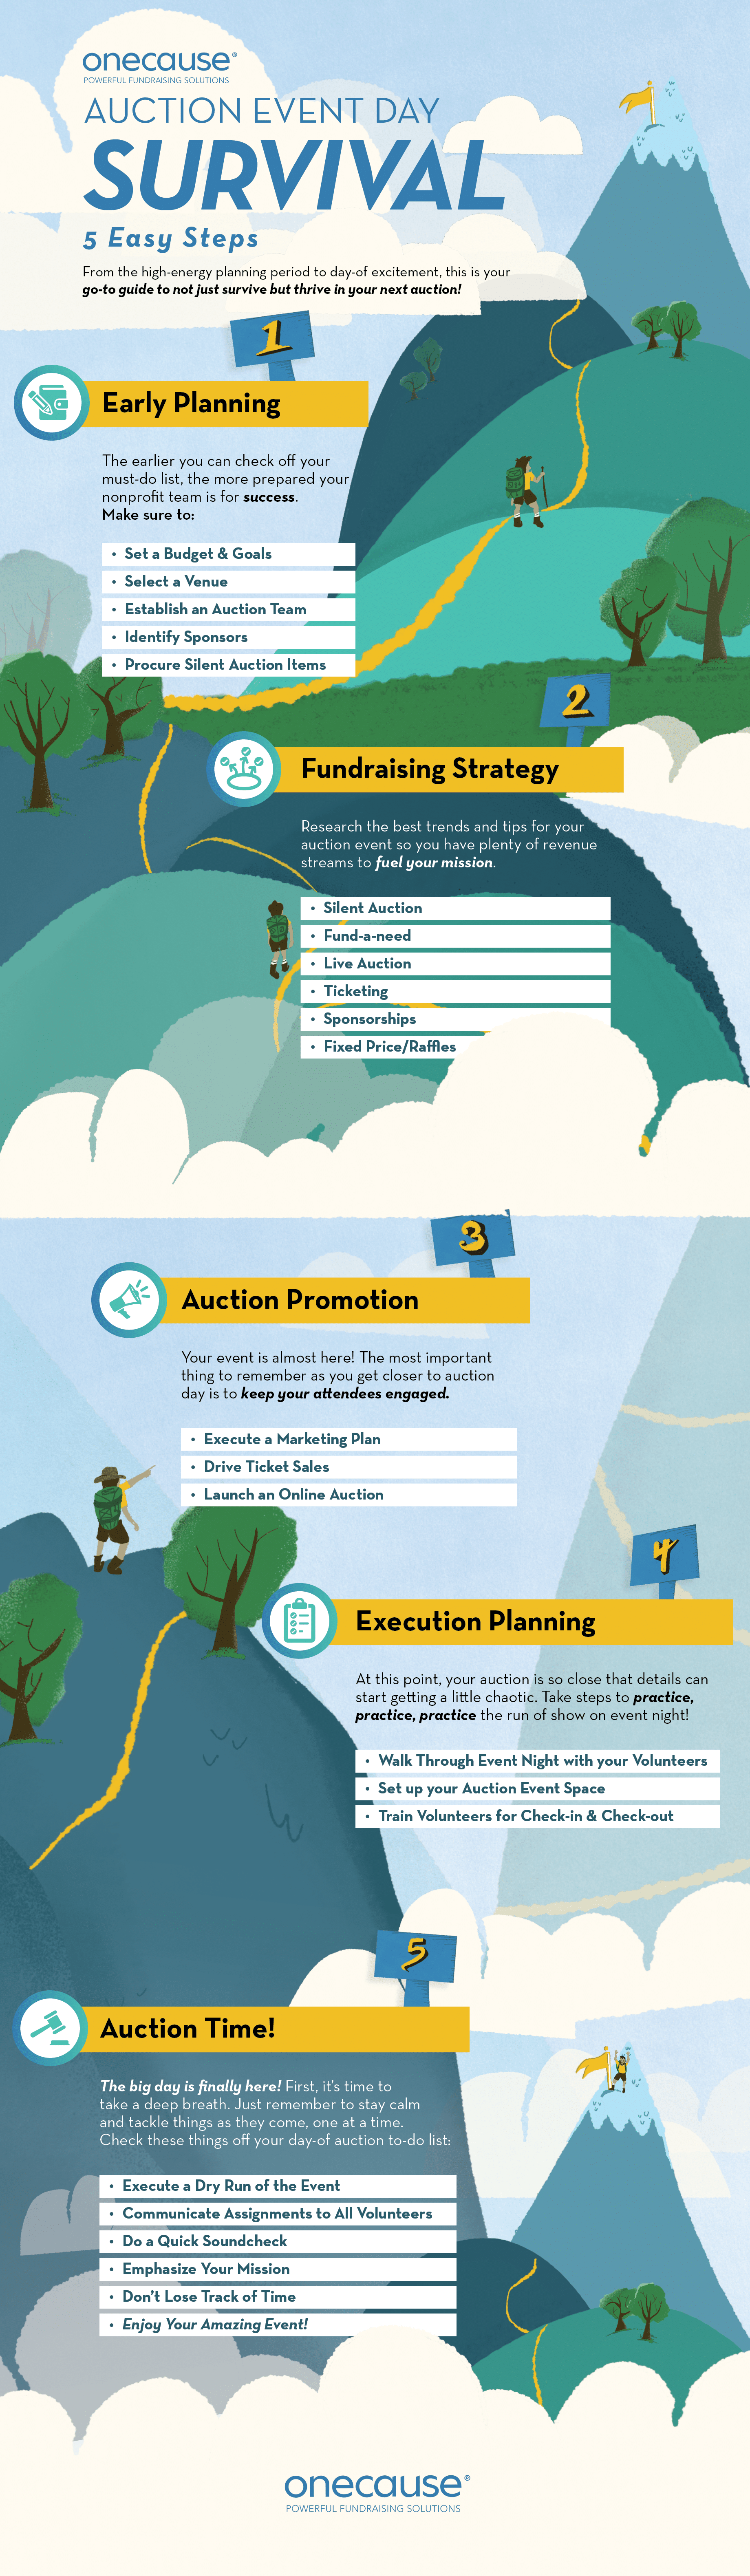 Charity Auction Survival Guide Infographic